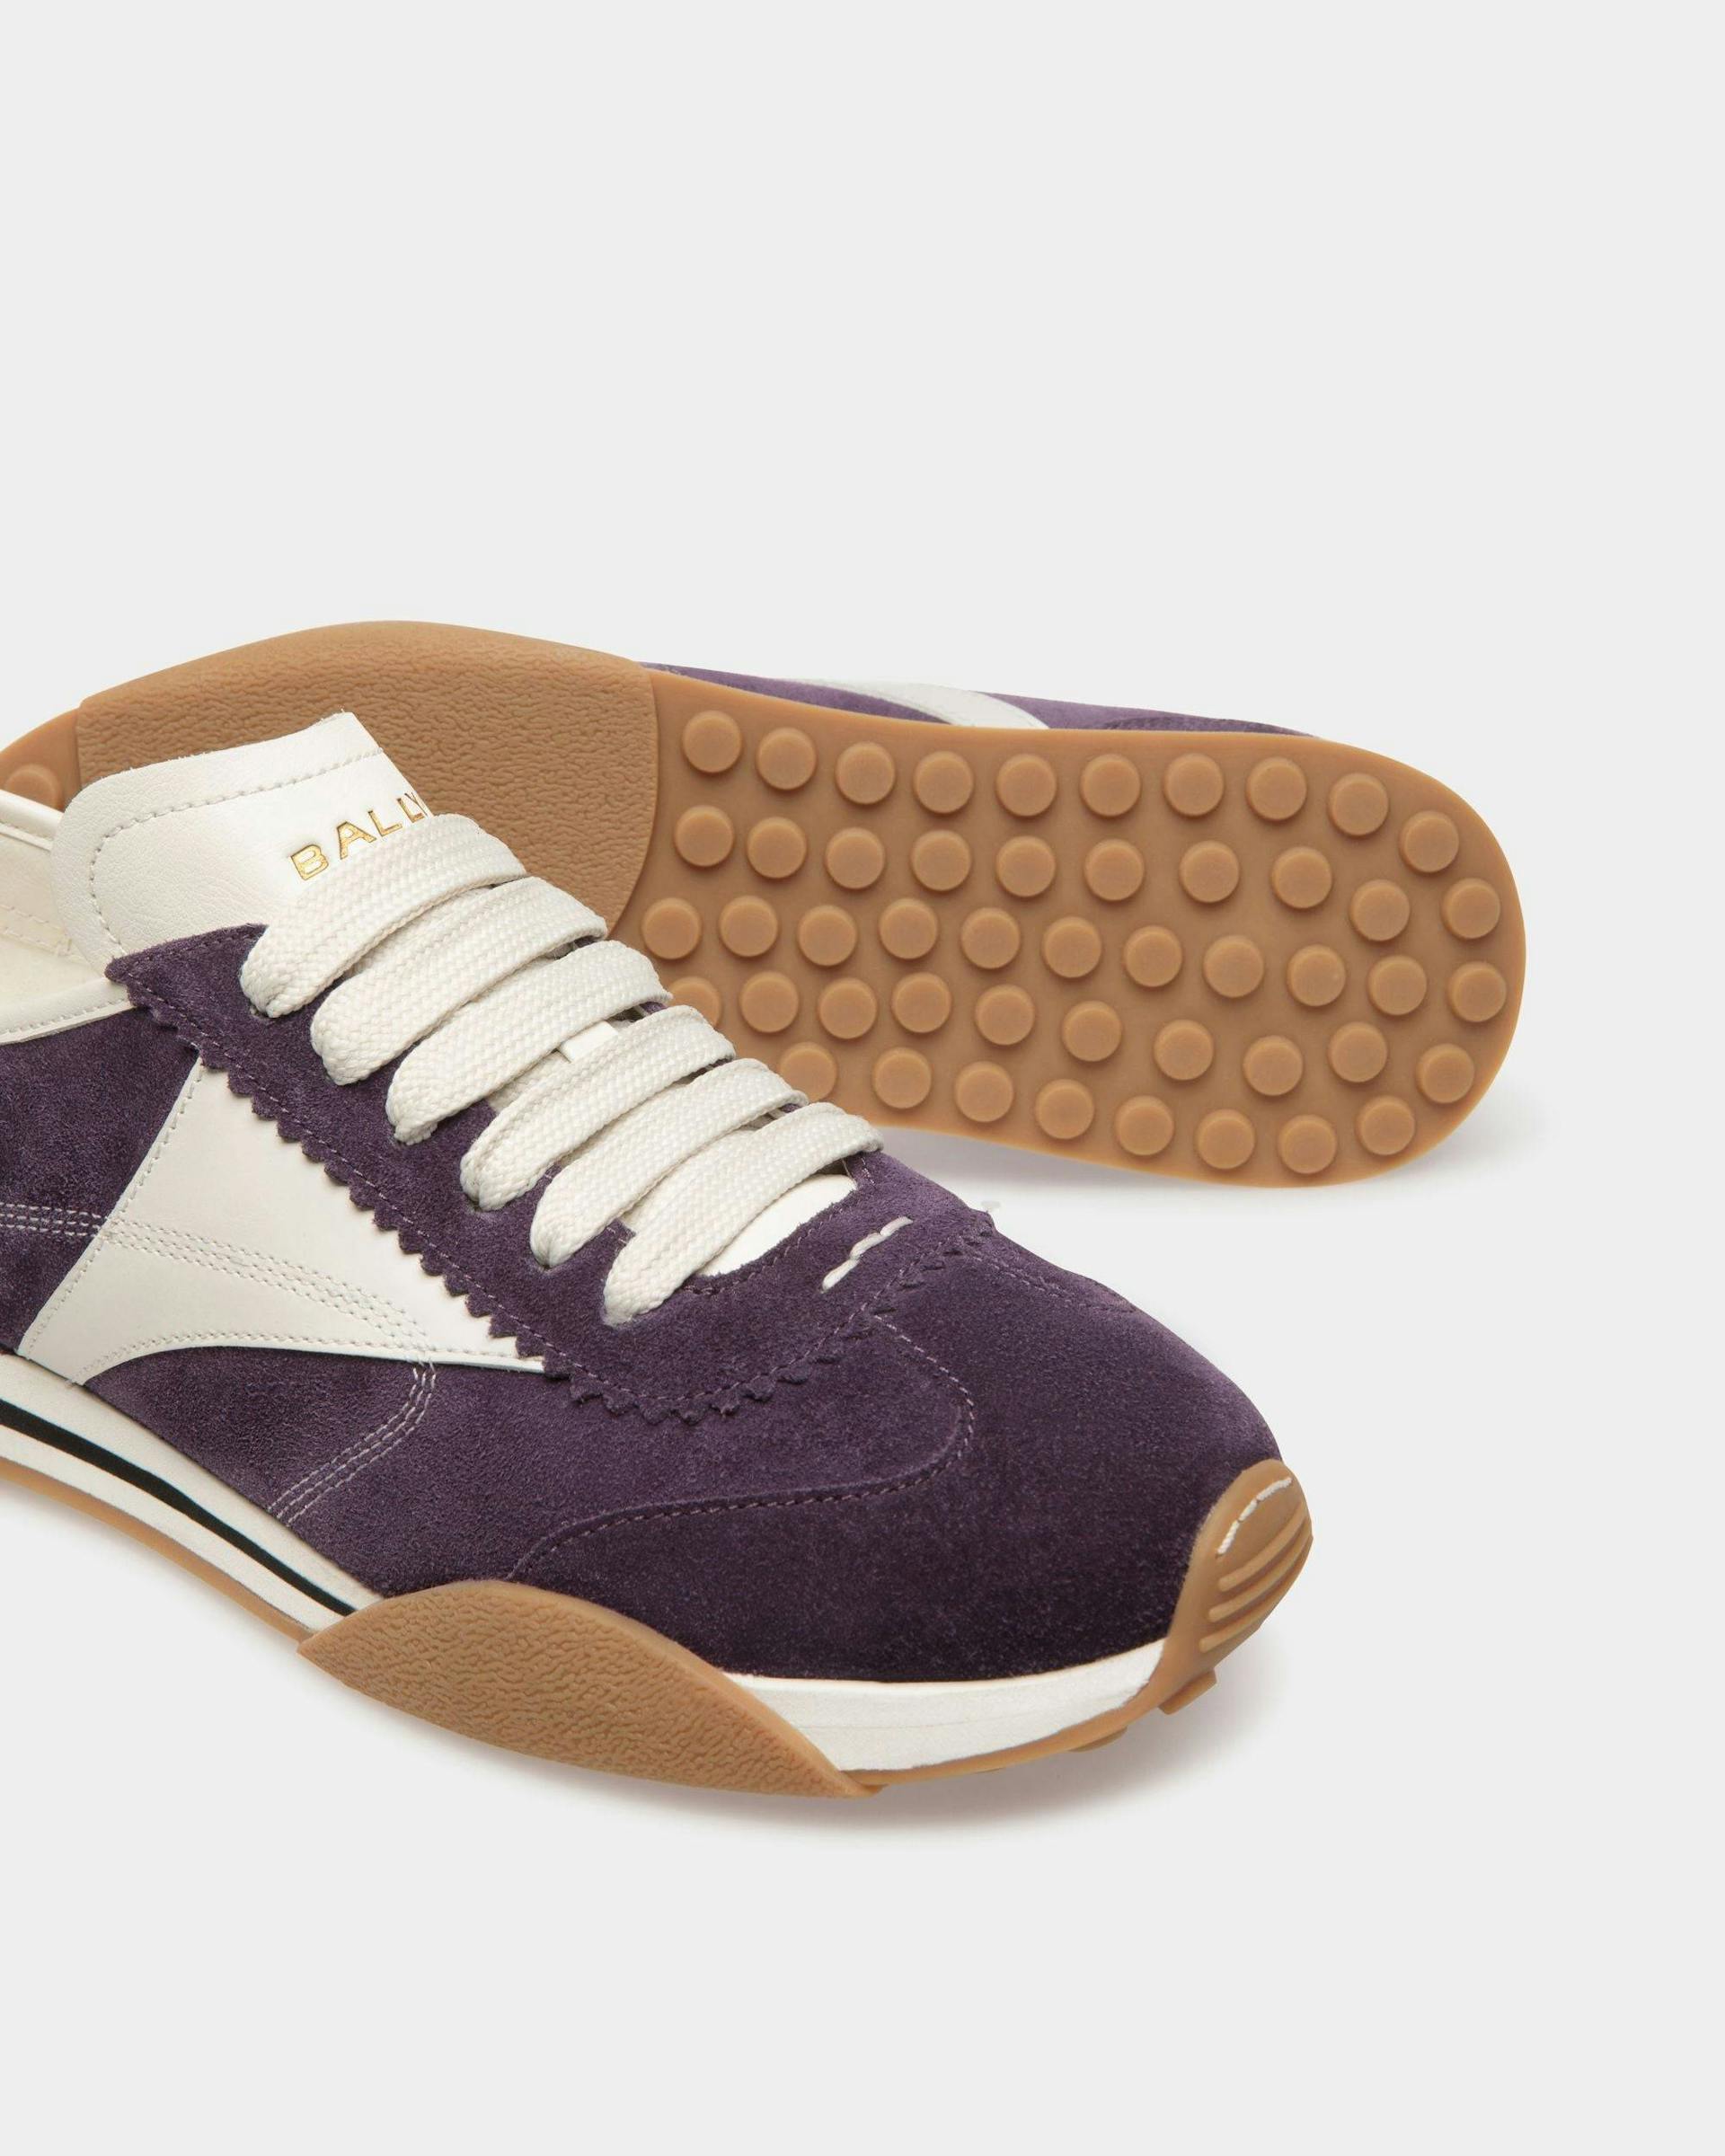 Sussex Sneakers In Orchid And White Leather - Women's - Bally - 05